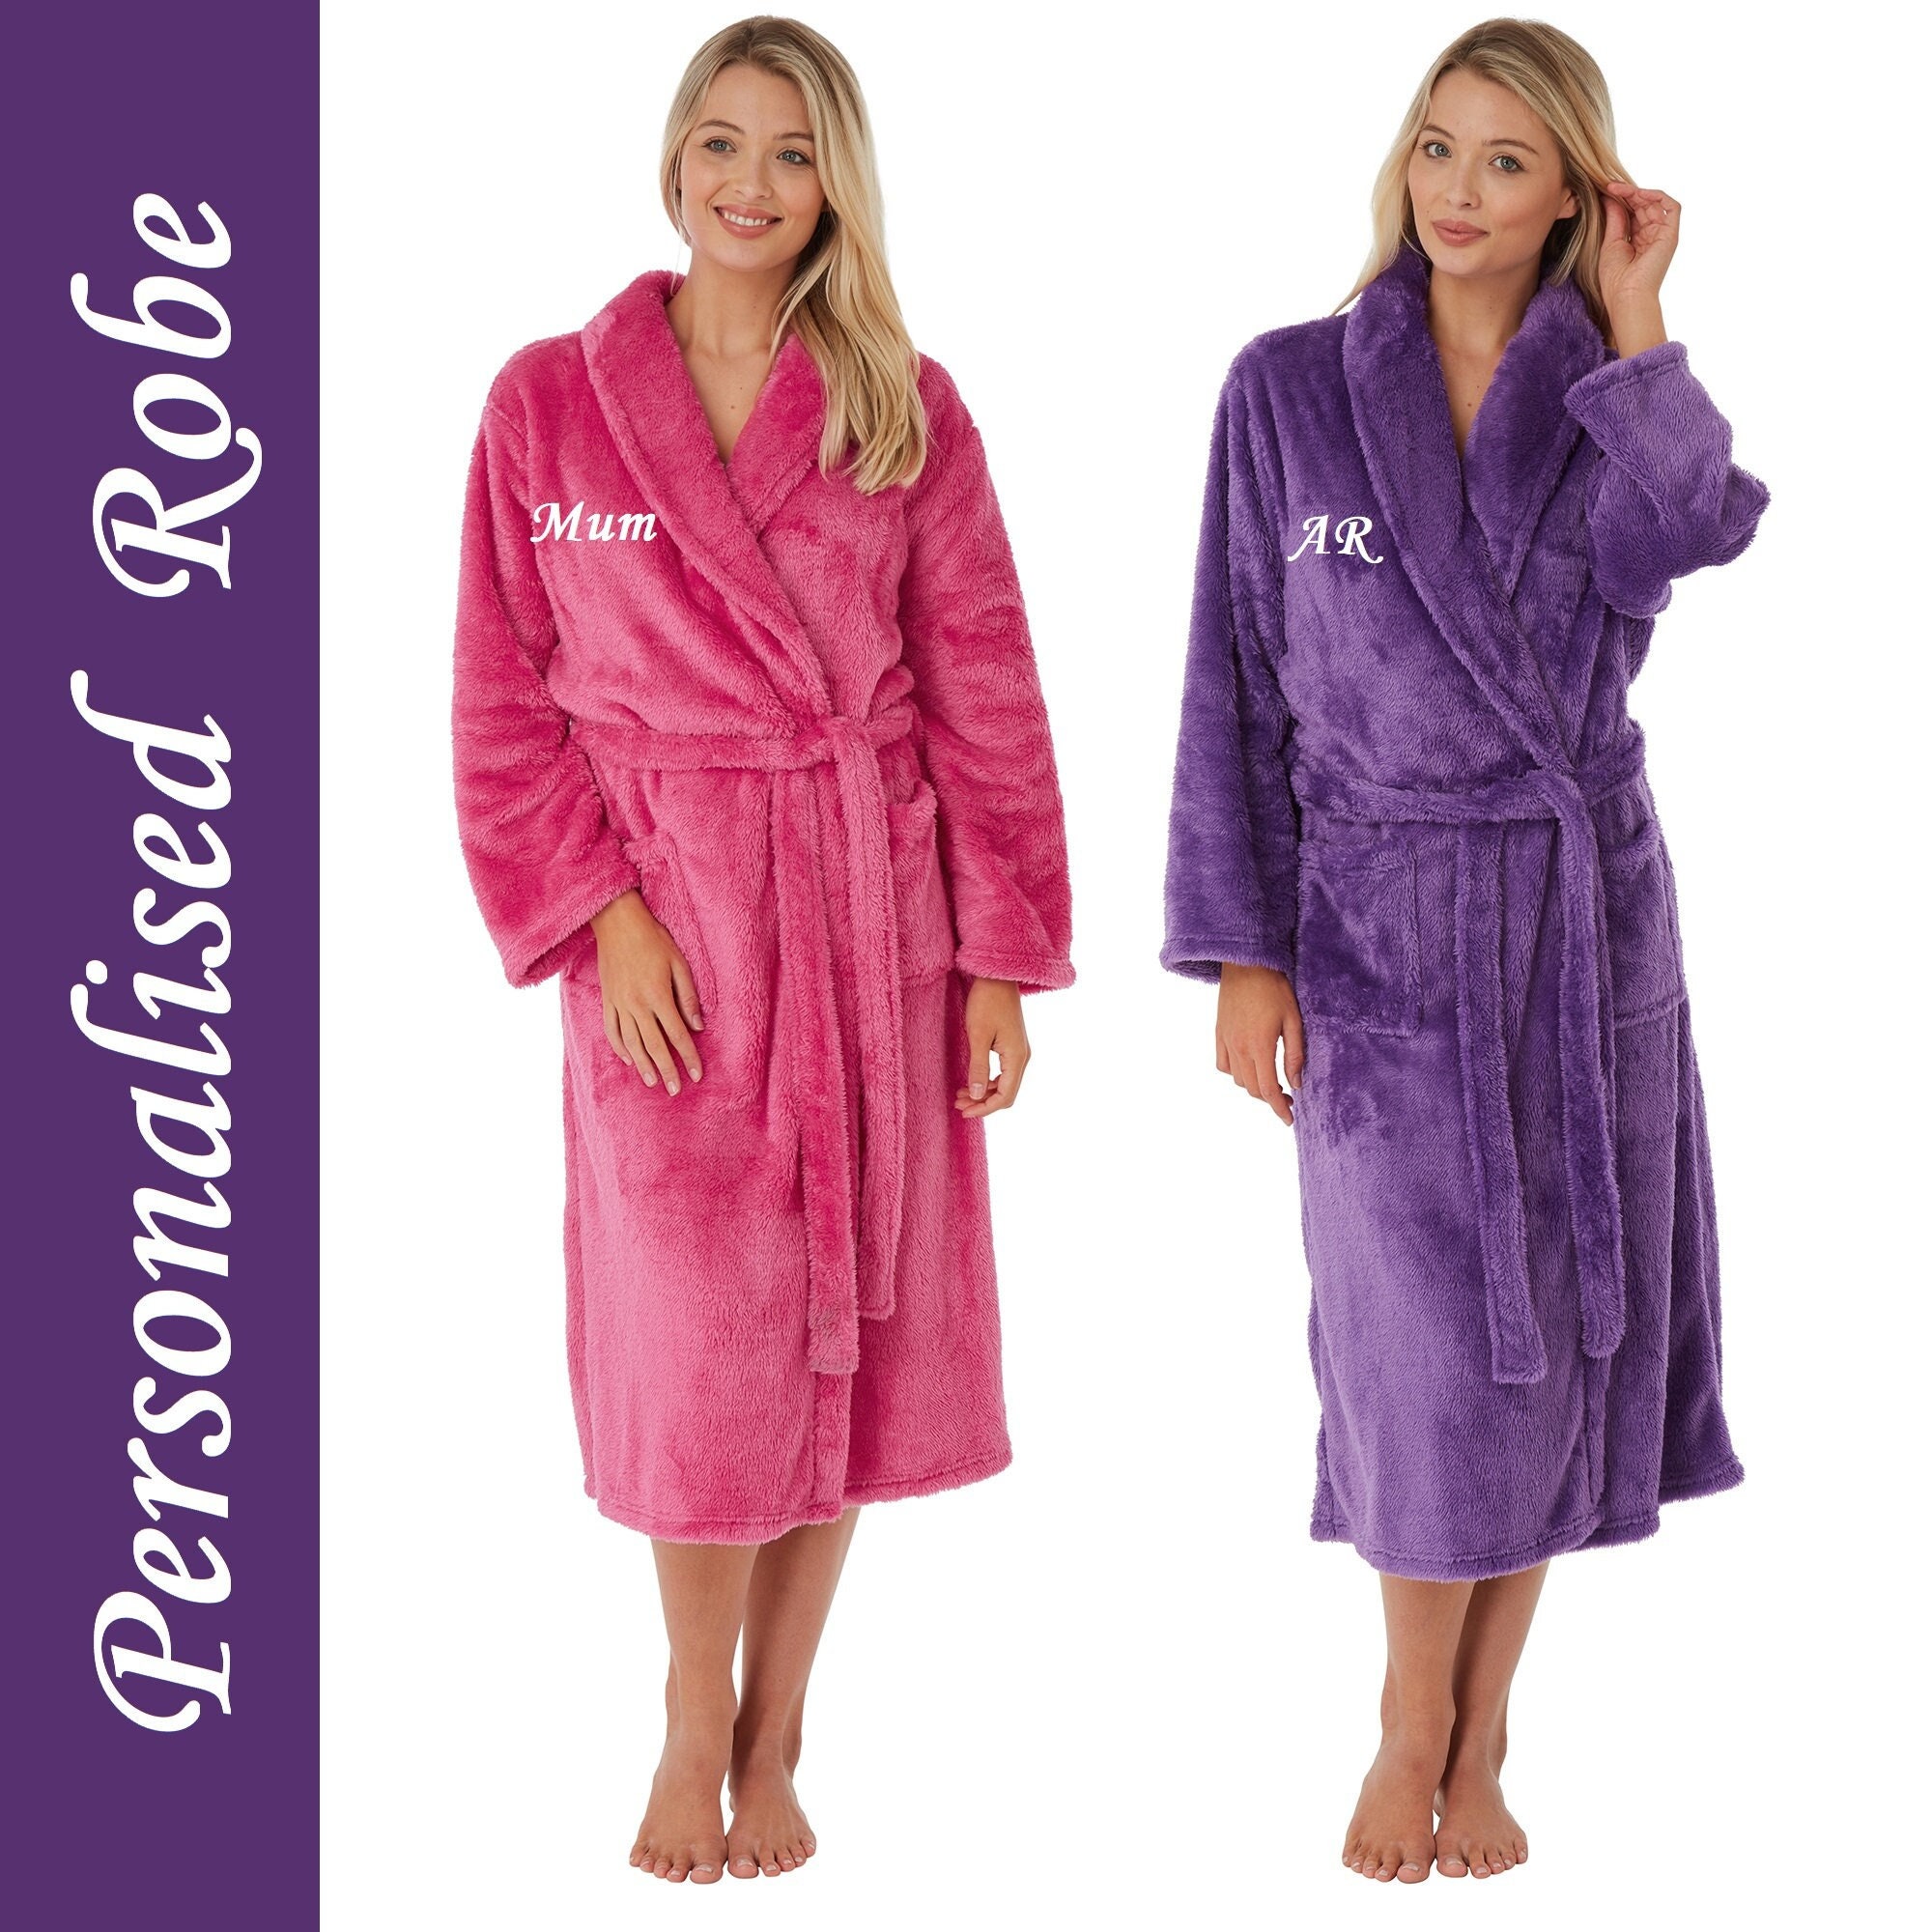 Buy Ladies Personalised Plush Jacquard Dressing Gown Online in India - Etsy